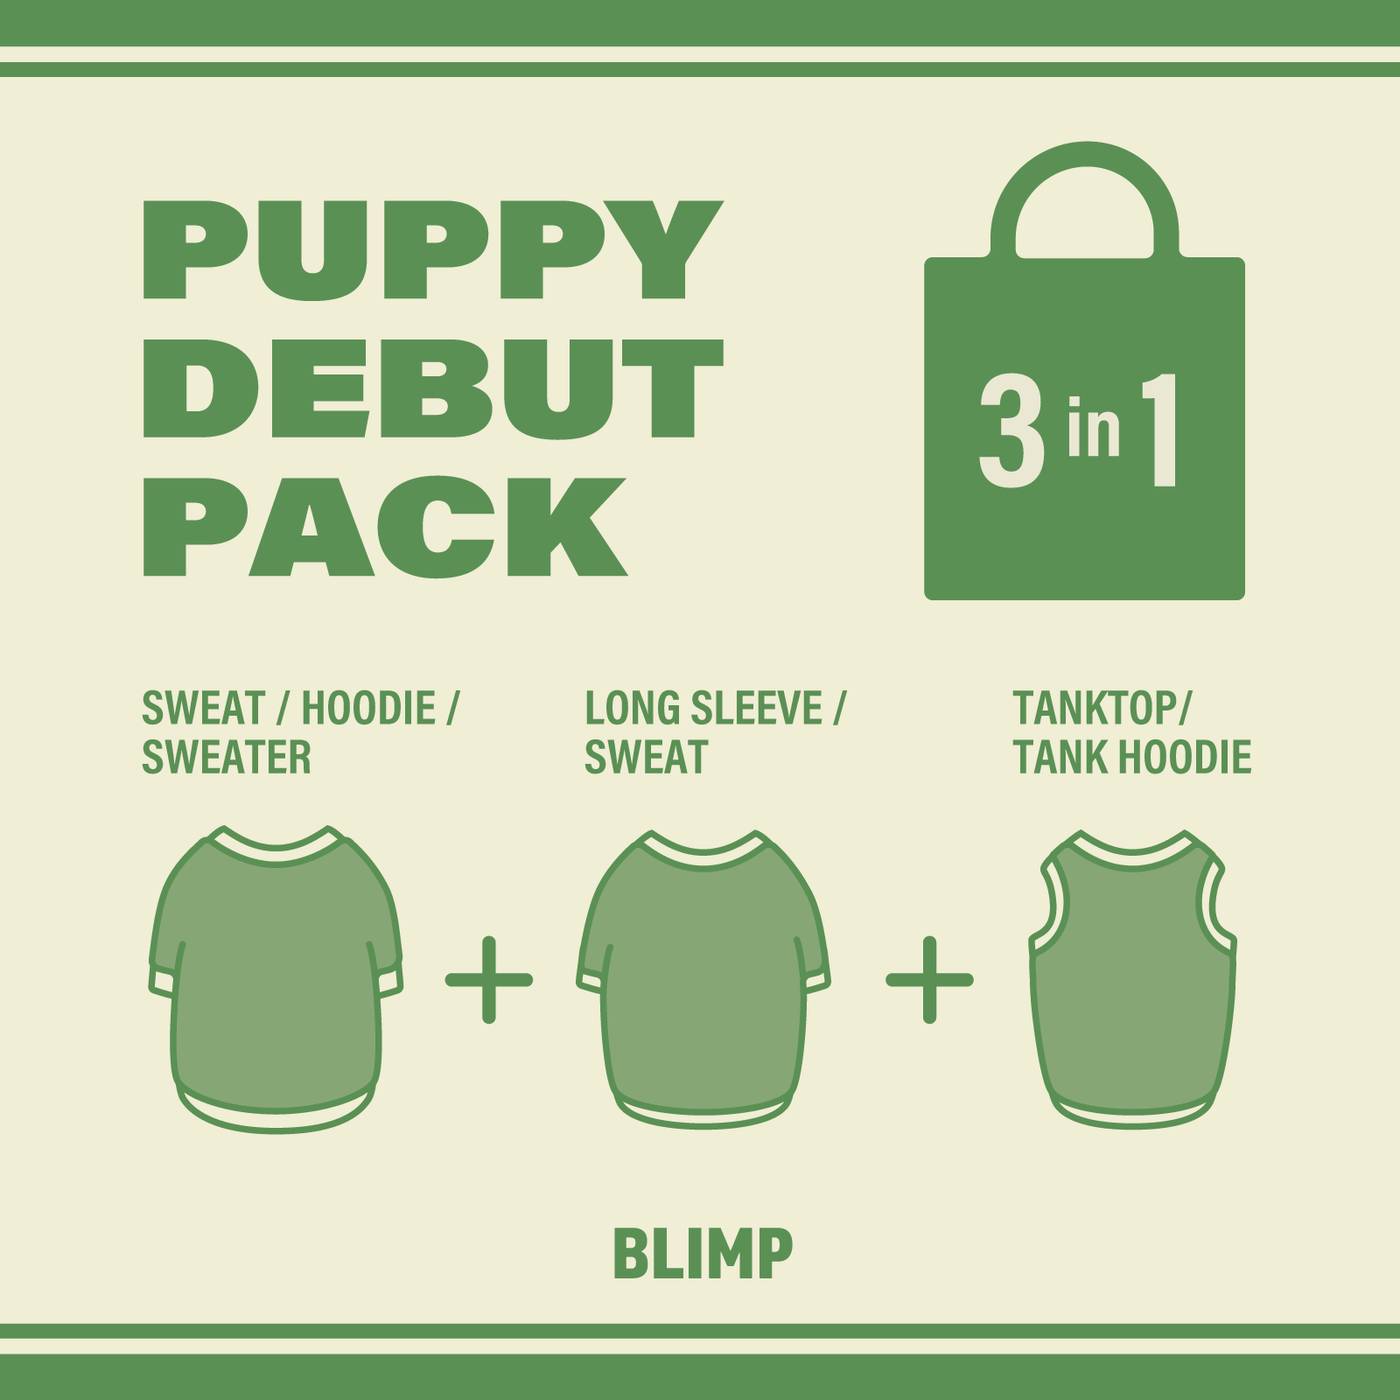 PUPPY DEBUT PACK